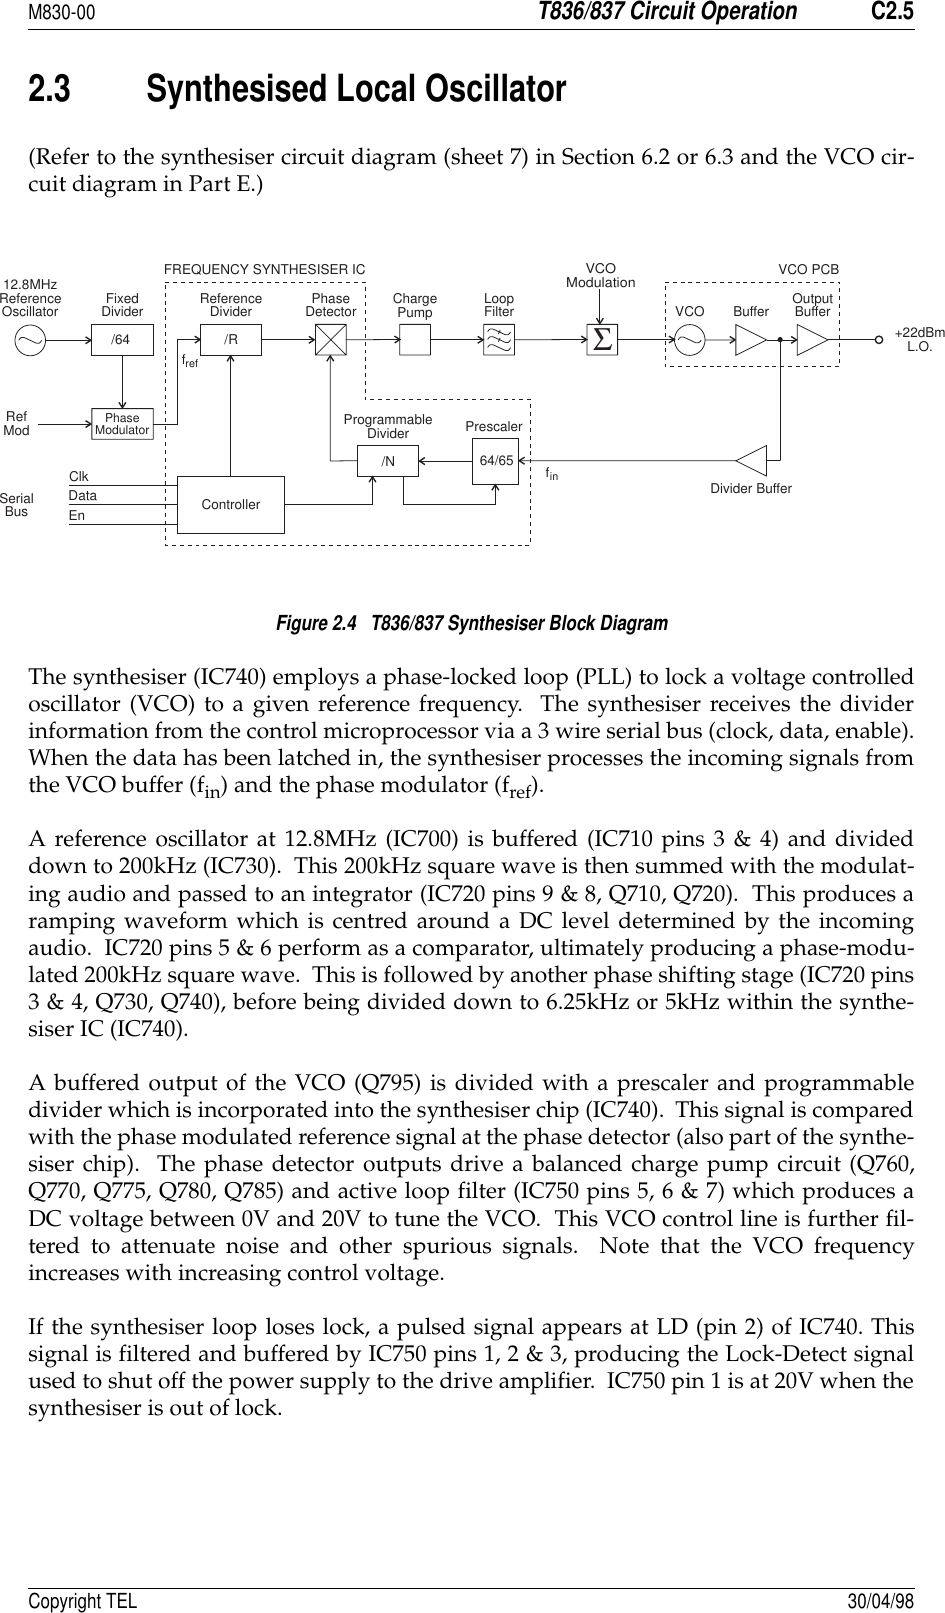 M830-00T836/837 Circuit OperationC2.5Copyright TEL 30/04/982.3 Synthesised Local Oscillator(Refer to the synthesiser circuit diagram (sheet 7) in Section 6.2 or 6.3 and the VCO cir-cuit diagram in Part E.)Figure 2.4   T836/837 Synthesiser Block DiagramThe synthesiser (IC740) employs a phase-locked loop (PLL) to lock a voltage controlledoscillator (VCO) to a given reference frequency.  The synthesiser receives the dividerinformation from the control microprocessor via a 3 wire serial bus (clock, data, enable).When the data has been latched in, the synthesiser processes the incoming signals fromthe VCO buffer (fin) and the phase modulator (fref).A reference oscillator at 12.8MHz (IC700) is buffered (IC710 pins 3 &amp; 4) and divideddown to 200kHz (IC730).  This 200kHz square wave is then summed with the modulat-ing audio and passed to an integrator (IC720 pins 9 &amp; 8, Q710, Q720).  This produces aramping waveform which is centred around a DC level determined by the incomingaudio.  IC720 pins 5 &amp; 6 perform as a comparator, ultimately producing a phase-modu-lated 200kHz square wave.  This is followed by another phase shifting stage (IC720 pins3 &amp; 4, Q730, Q740), before being divided down to 6.25kHz or 5kHz within the synthe-siser IC (IC740).A buffered output of the VCO (Q795) is divided with a prescaler and programmabledivider which is incorporated into the synthesiser chip (IC740).  This signal is comparedwith the phase modulated reference signal at the phase detector (also part of the synthe-siser chip).  The phase detector outputs drive a balanced charge pump circuit (Q760,Q770, Q775, Q780, Q785) and active loop filter (IC750 pins 5, 6 &amp; 7) which produces aDC voltage between 0V and 20V to tune the VCO.  This VCO control line is further fil-tered to attenuate noise and other spurious signals.  Note that the VCO frequencyincreases with increasing control voltage.If the synthesiser loop loses lock, a pulsed signal appears at LD (pin 2) of IC740. Thissignal is filtered and buffered by IC750 pins 1, 2 &amp; 3, producing the Lock-Detect signalused to shut off the power supply to the drive amplifier.  IC750 pin 1 is at 20V when thesynthesiser is out of lock./RReferenceDivider12.8MHzReferenceOscillator FixedDivider/64PhaseModulatorRefModPhaseDetector ChargePump LoopFilterFREQUENCY SYNTHESISER ICSerialBusClkDataEn Controller/NProgrammableDivider64/65PrescalerVCO PCBVCO ModulationVCO Buffer OutputBuffer+22dBmL.O.Divider BufferfreffinΣ